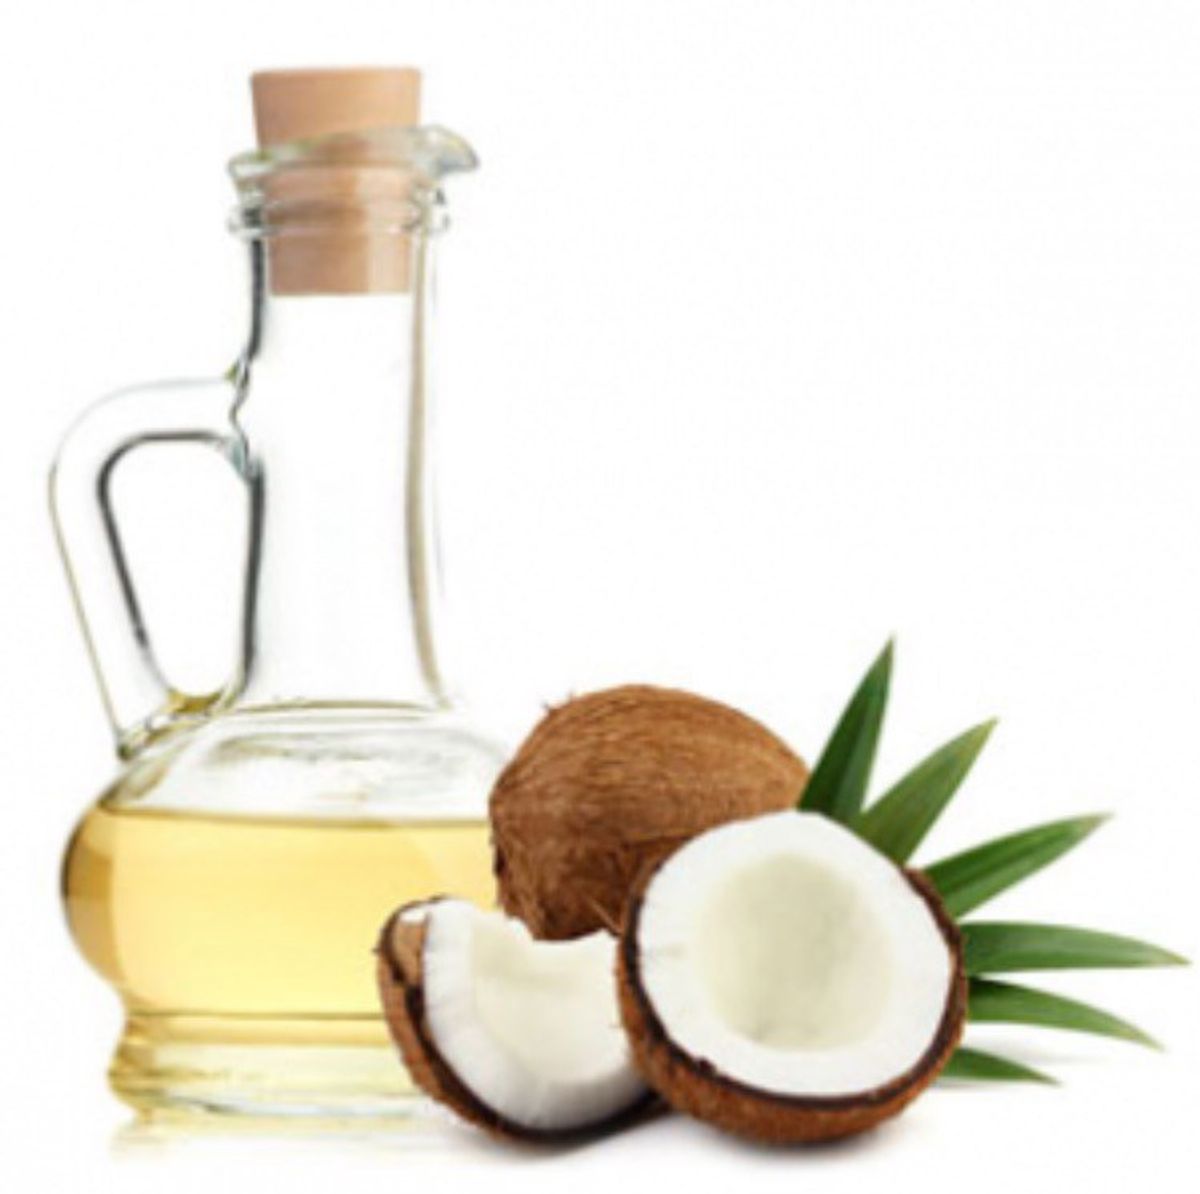 25 Ways Coconut Oil Will Change Your Life